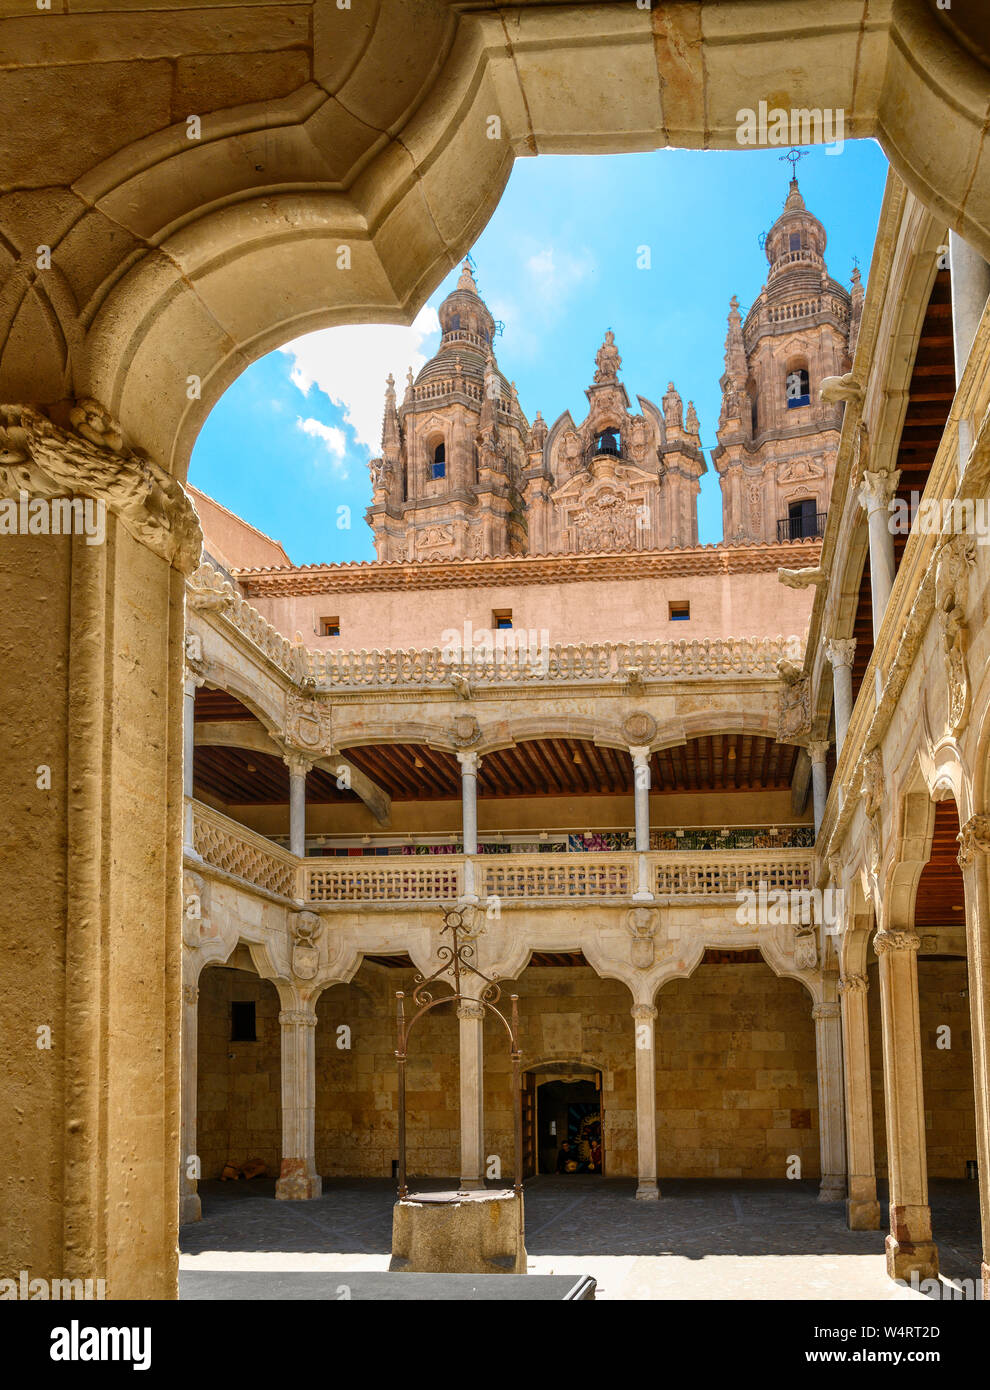 The interior courtyard of the, 16th century, Casa De Las Conchas with the Cathedral in the background, Salamanca, Spain. Stock Photo